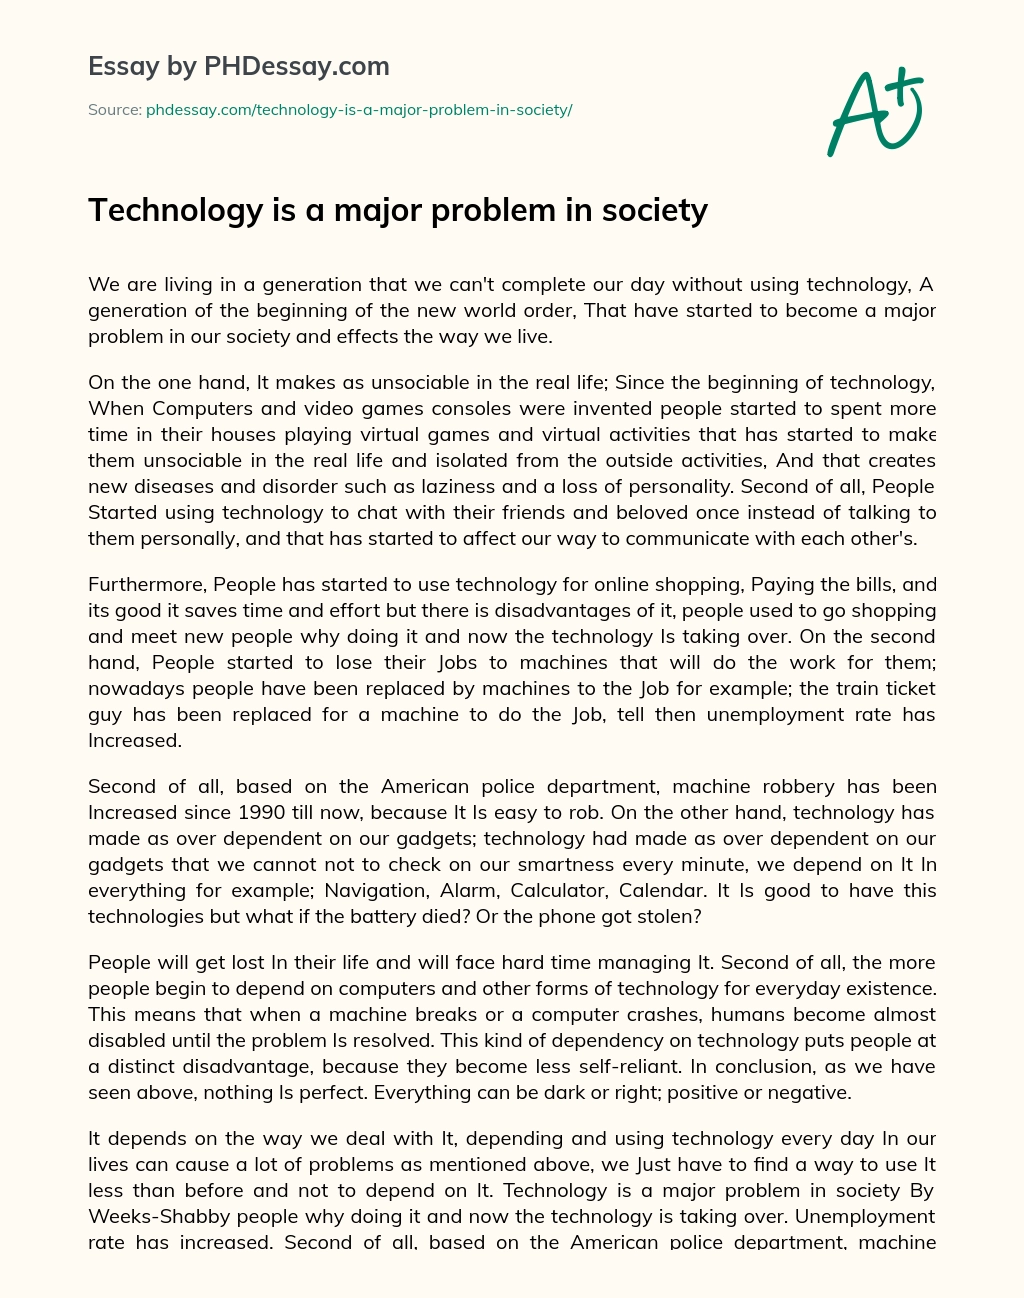 problems technology cannot solve